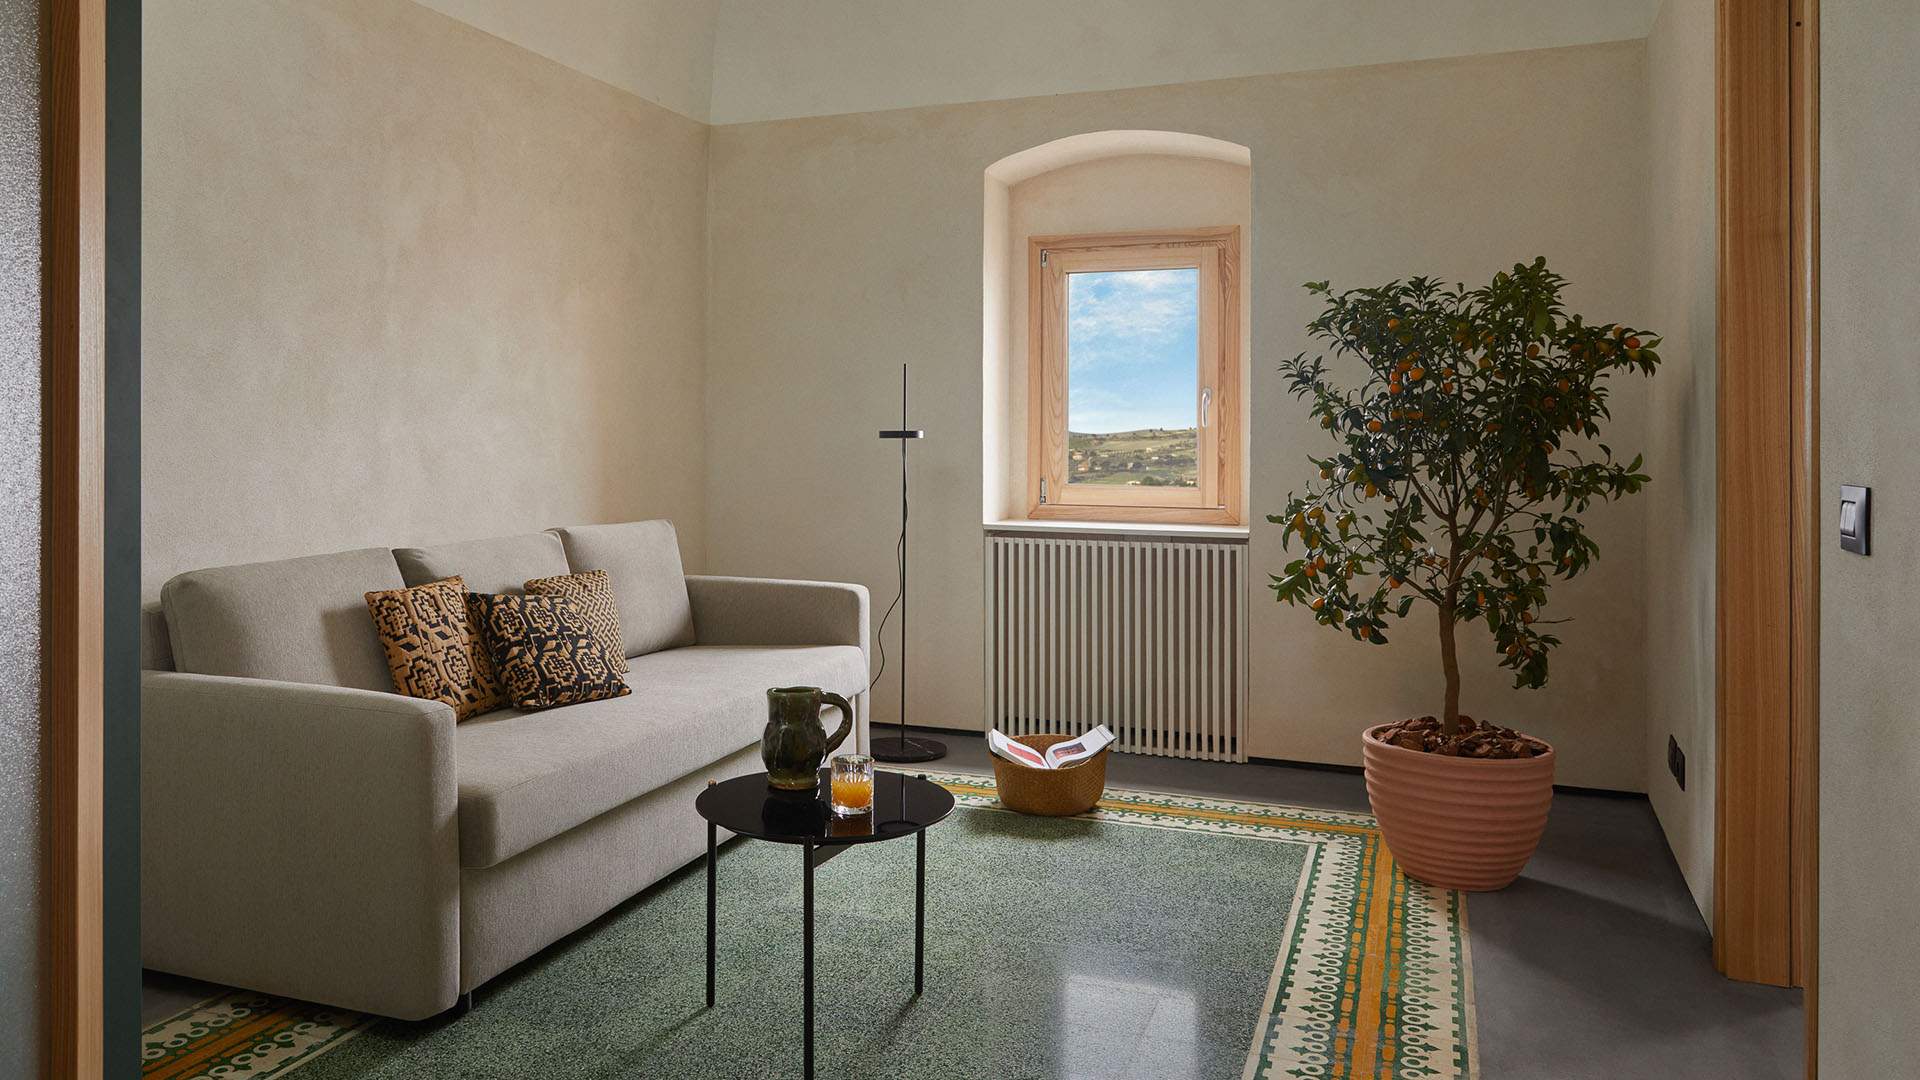 Airbnb Wants You to Spend a Year Living Rent-Free in a Gorgeous Sicily Townhouse